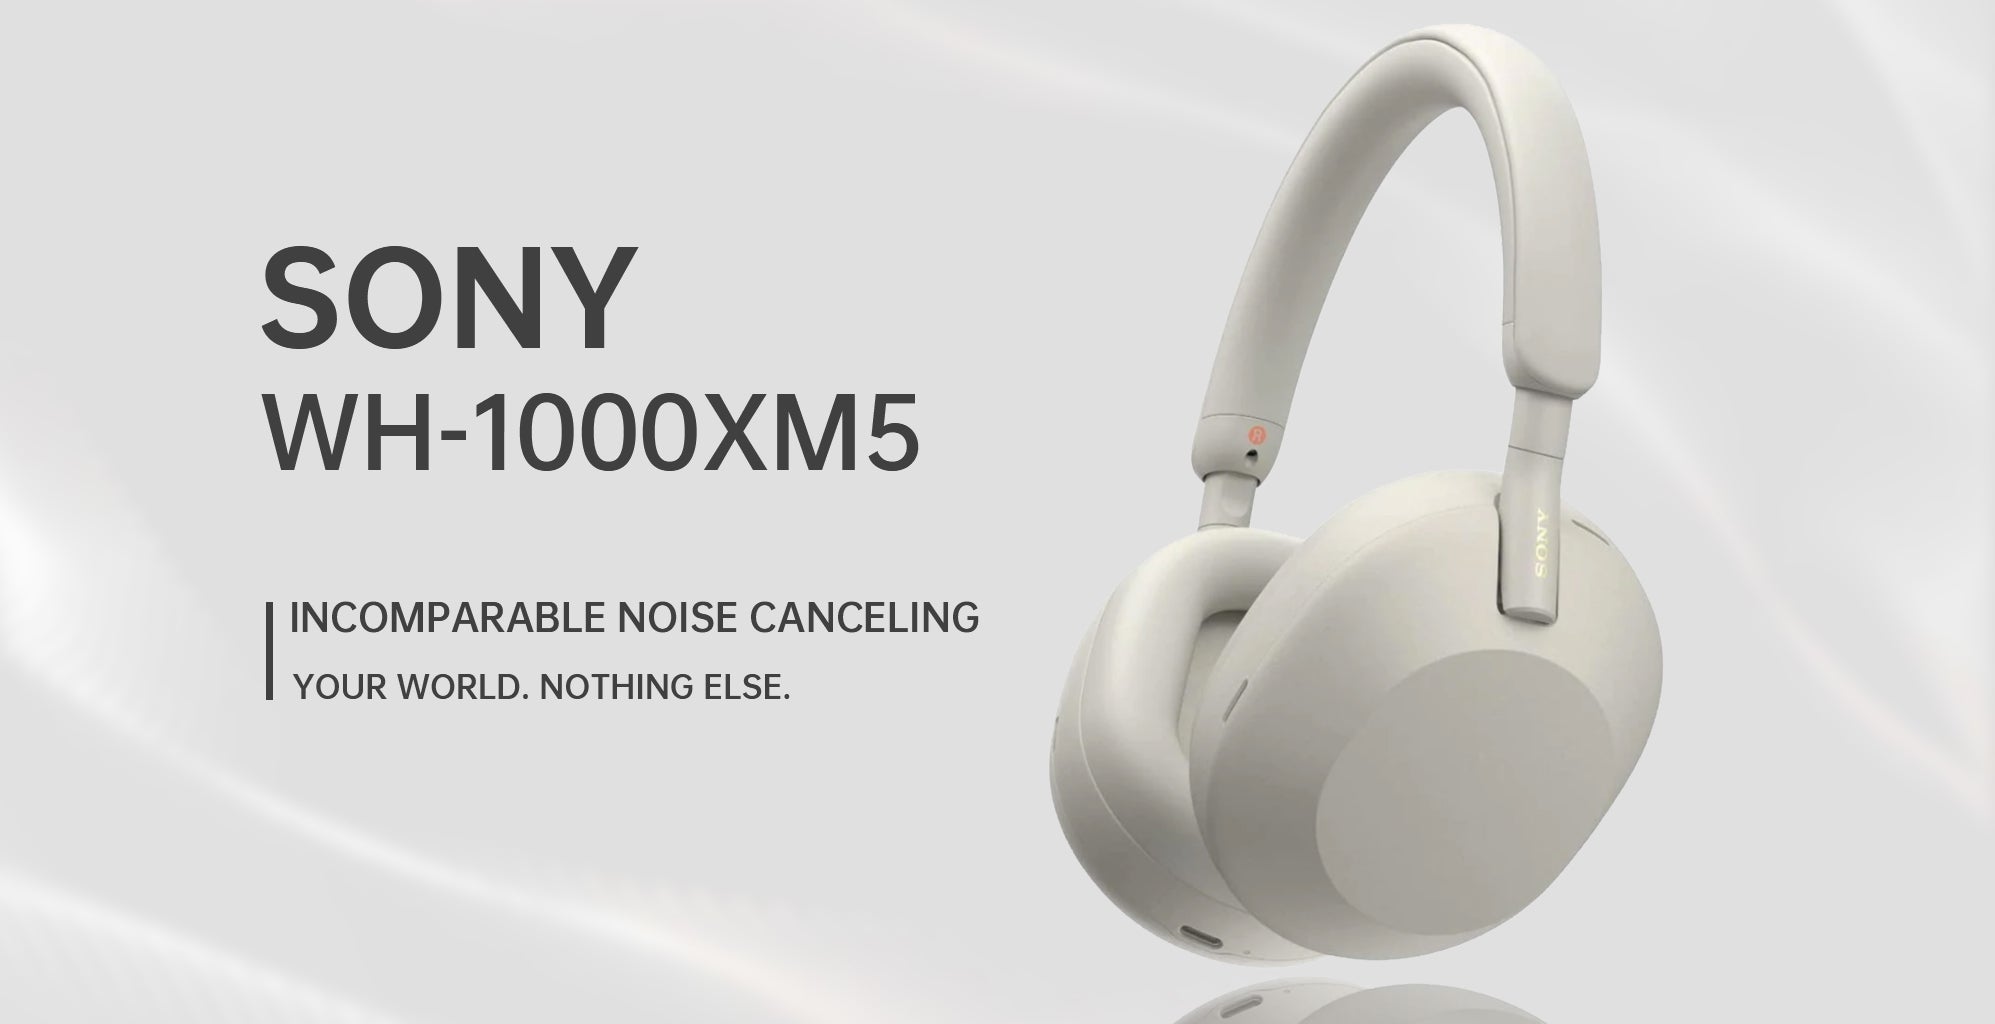 Sony WH-1000XM5 wireless noise-cancelling headphones on the home page